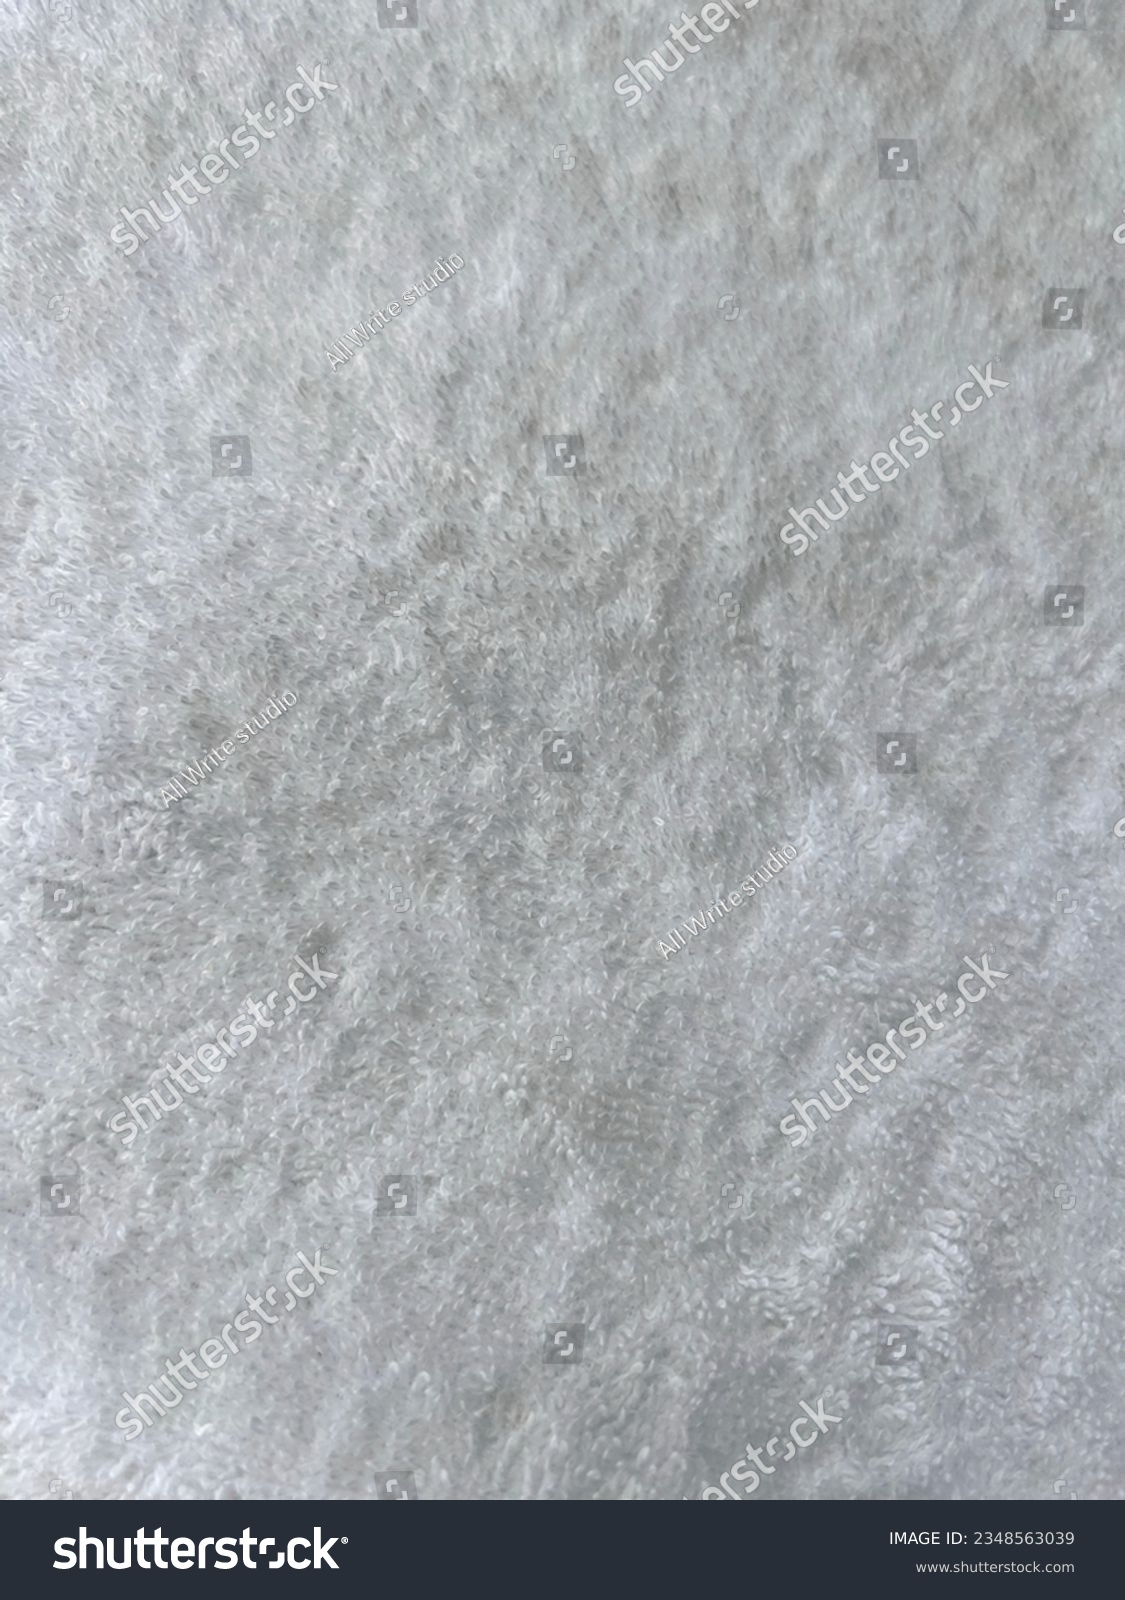 Gray fluffy textile surface, fur fabric. Grey fur. Abstract fabric background. Gray warm cloth concept for background. Fluffy texture. Grey carpet texture. High quality photos. #2348563039